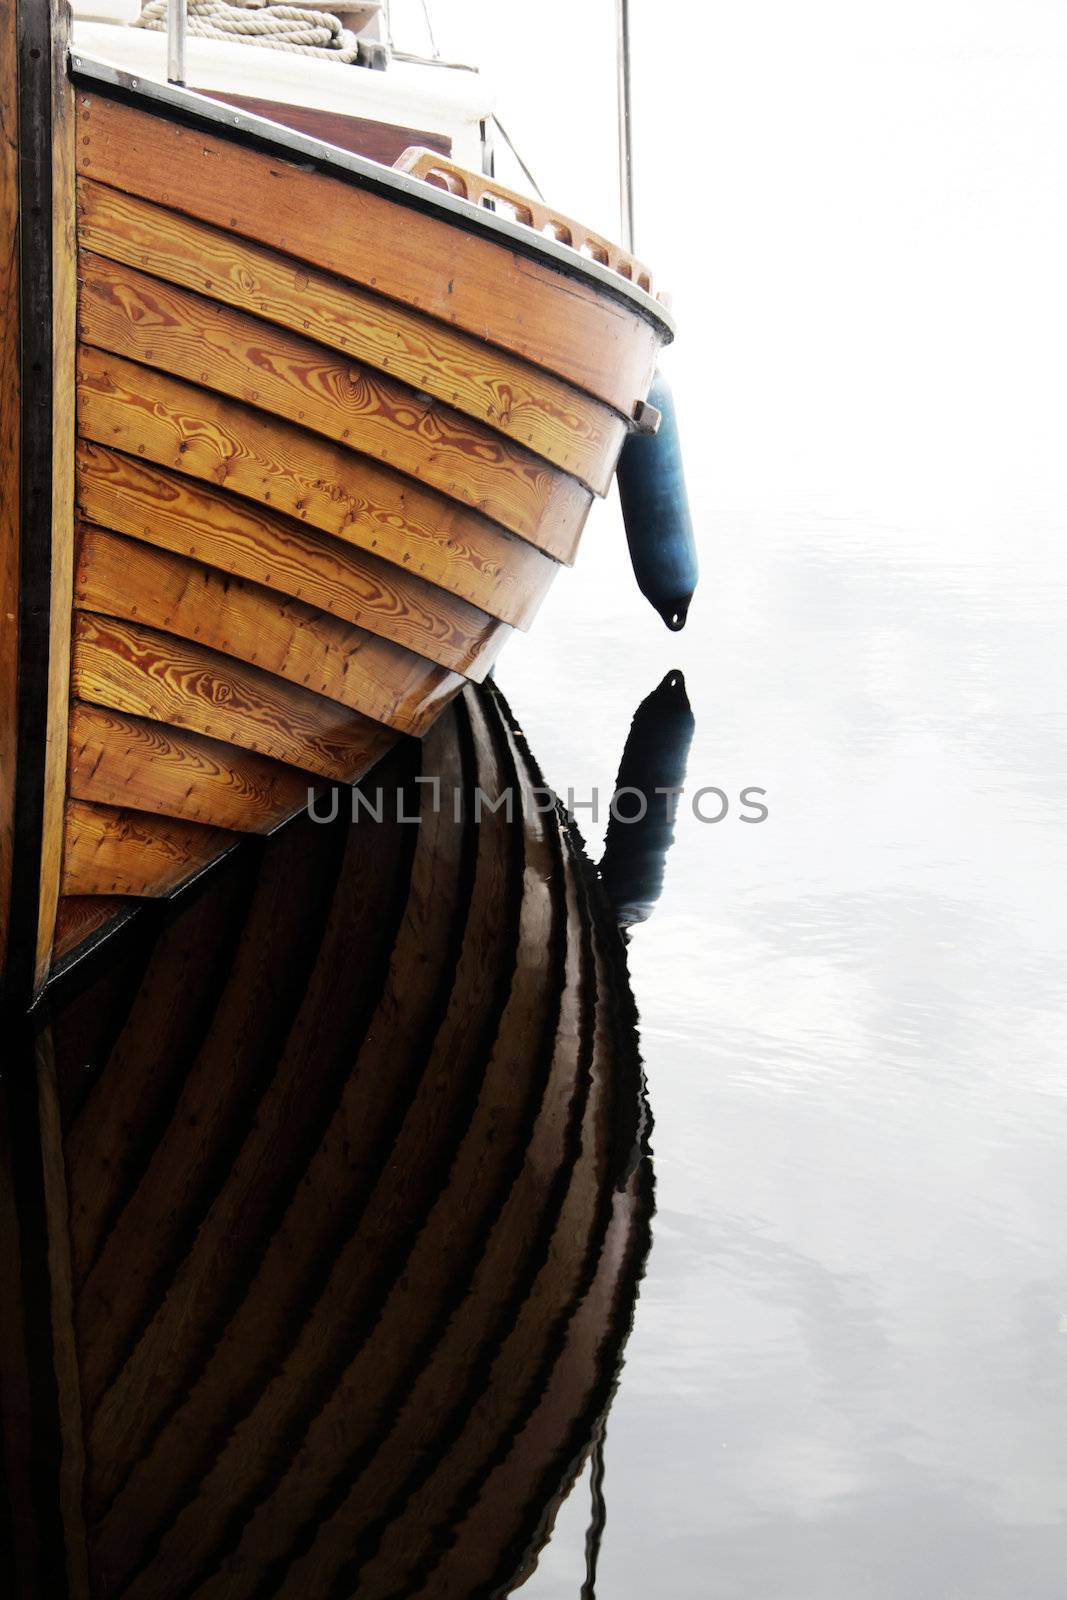 A closeup of a wooden boat, reflection in the lake